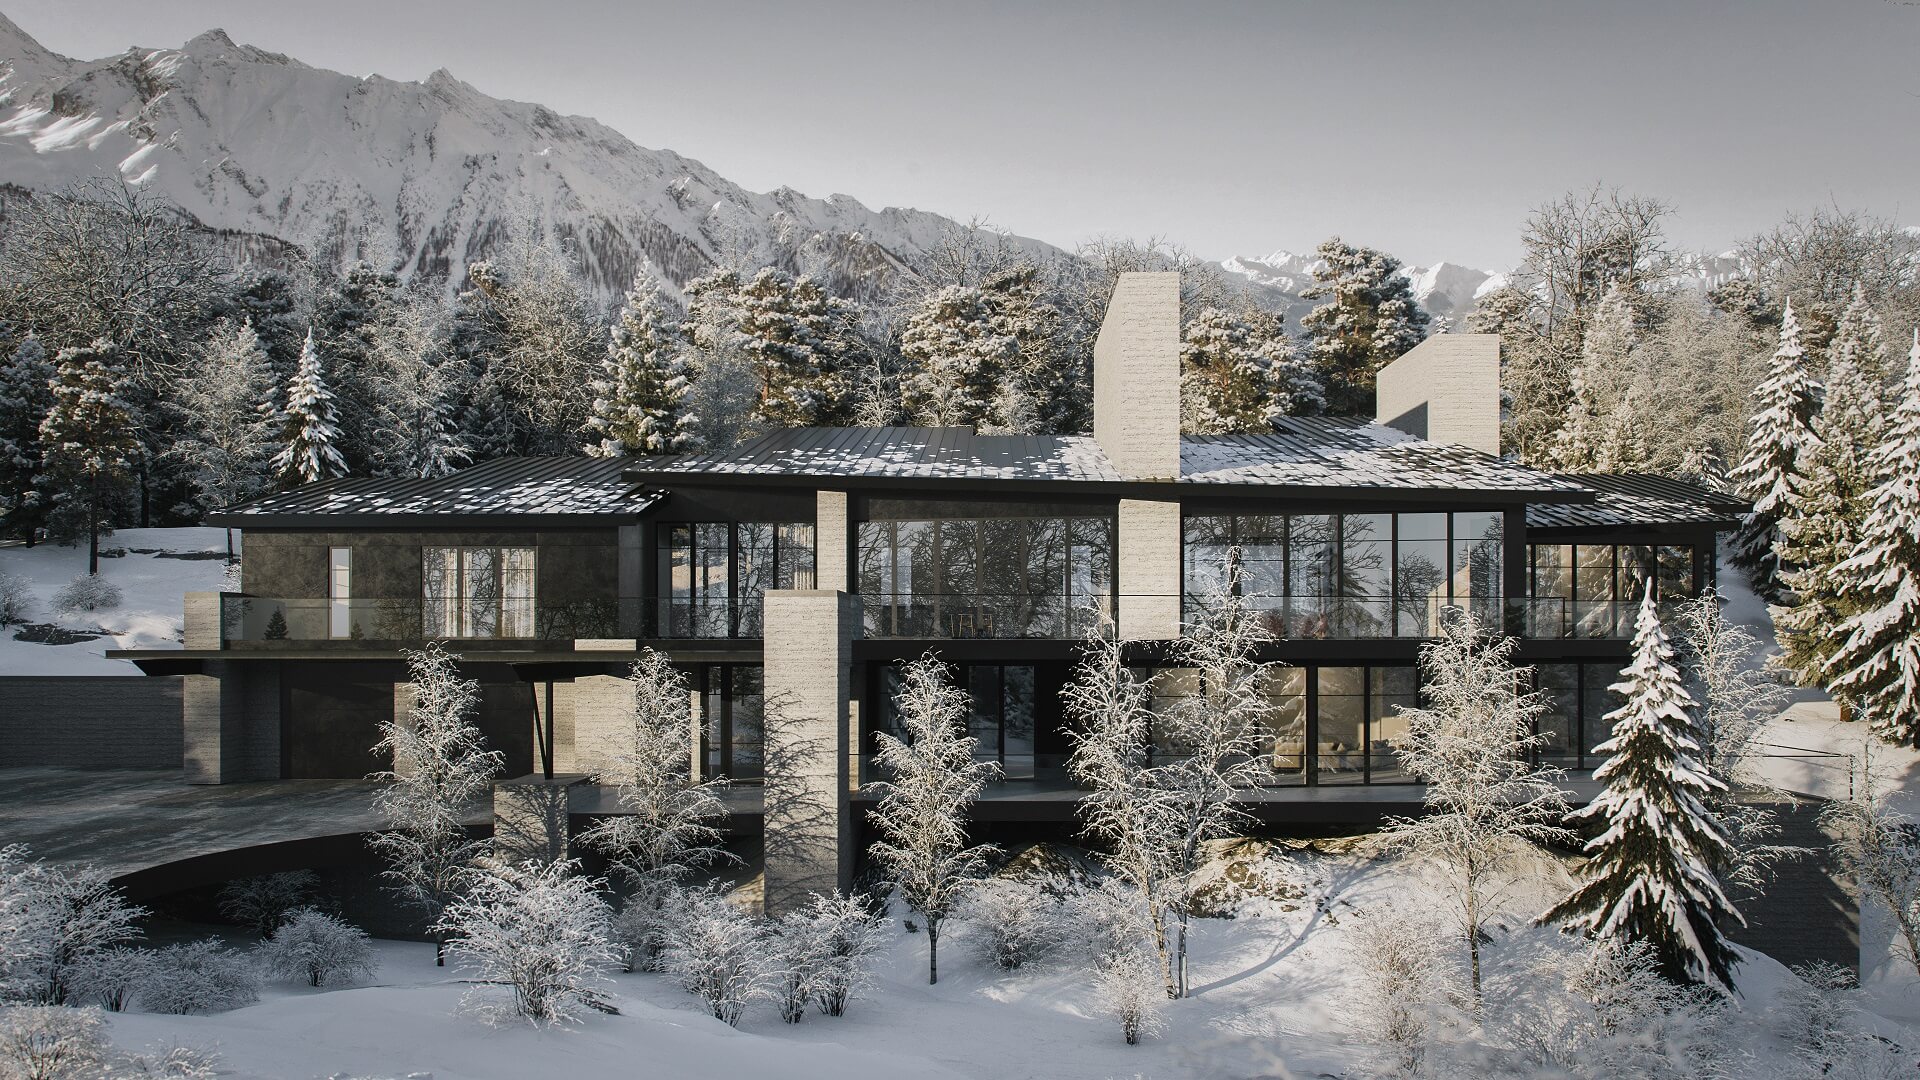 Intermediate Results of the Winter Residence 3D Rendering